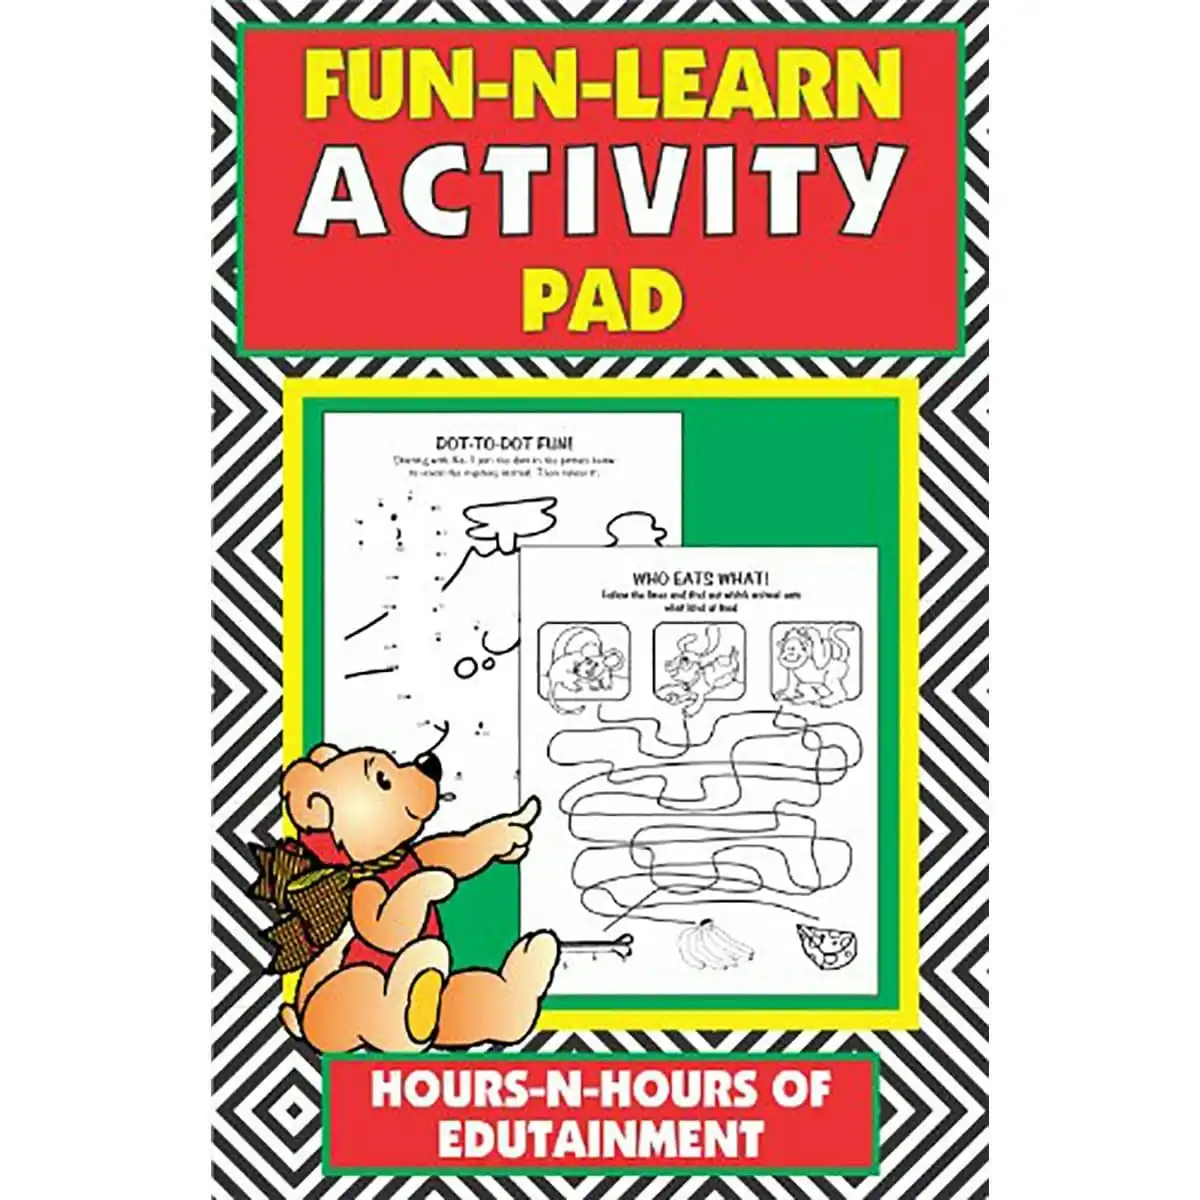 Promotional Fun-n-learn Activity Pad